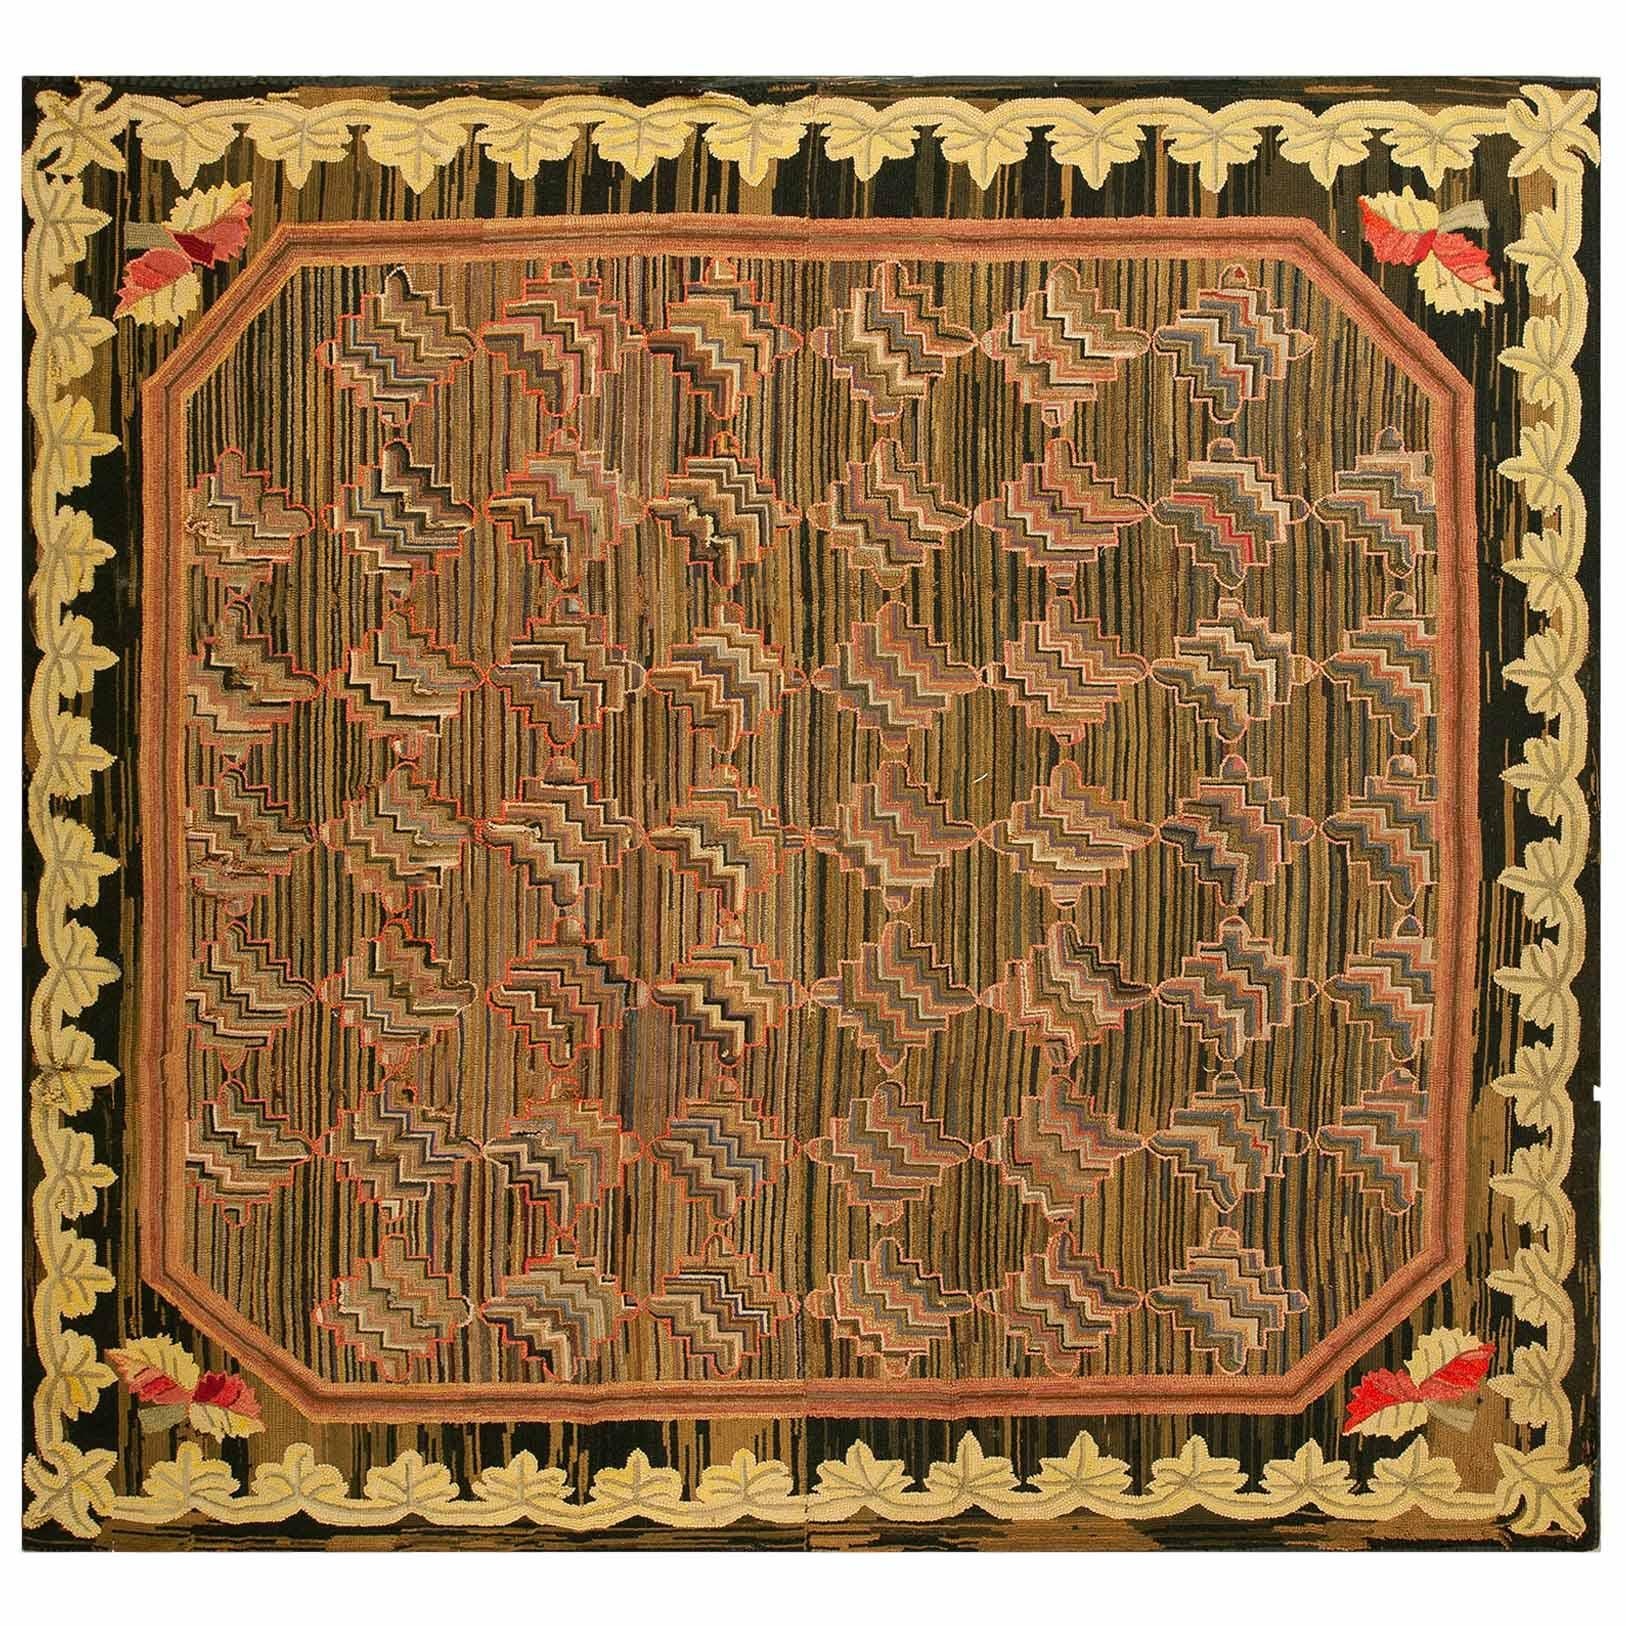 19th Century American Hooked Rug ( 8'8" x 8'10" - 264 x 269 ) For Sale